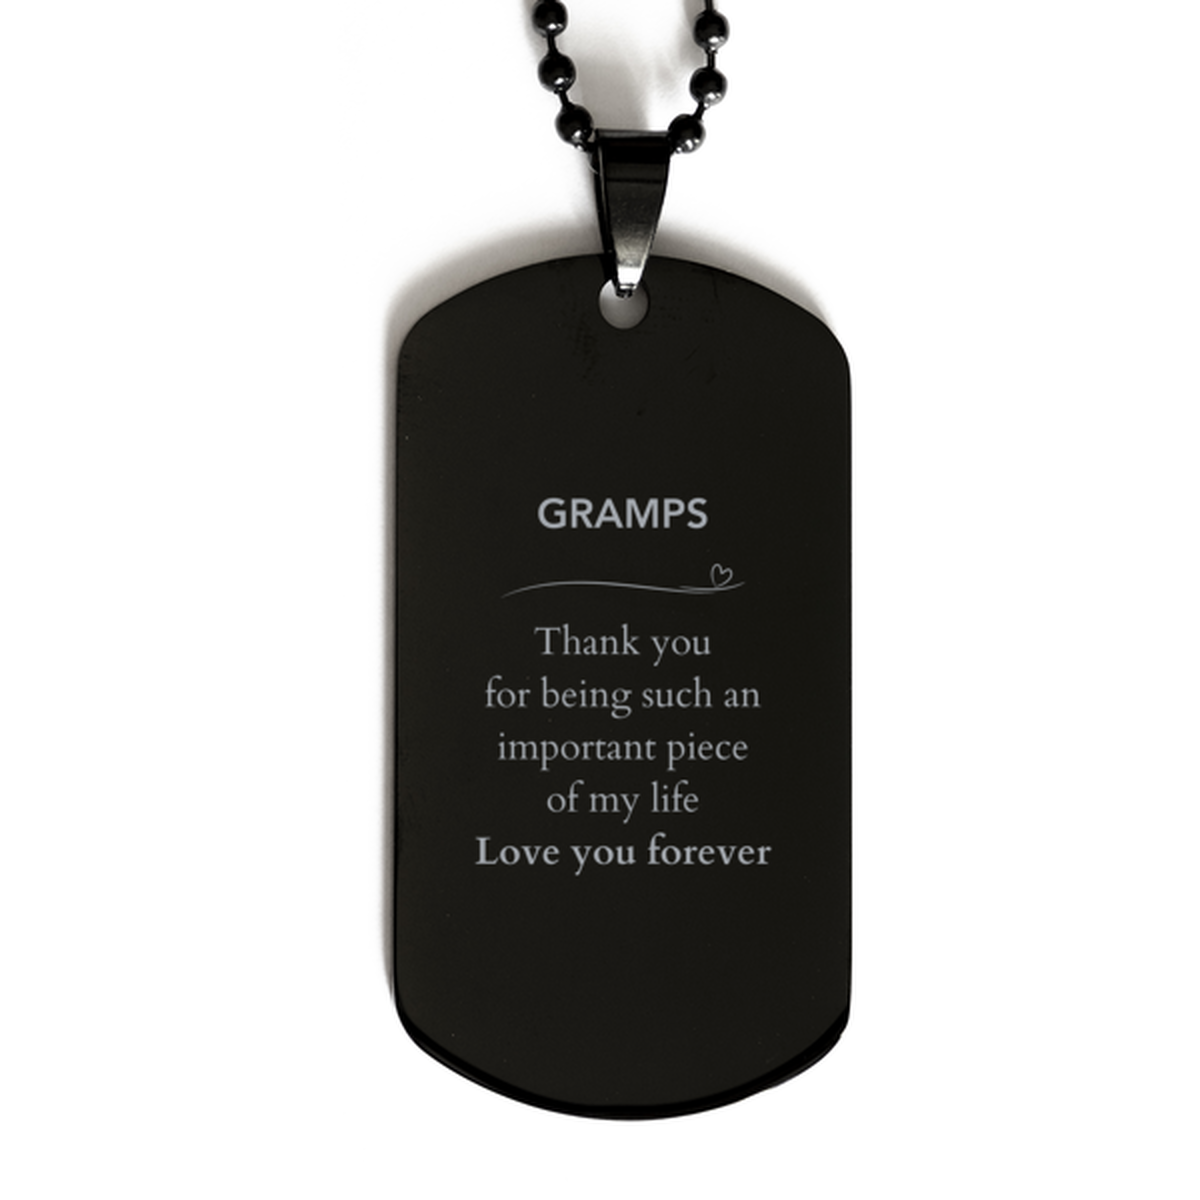 Appropriate Gramps Black Dog Tag Epic Birthday Gifts for Gramps Thank you for being such an important piece of my life Gramps Christmas Mothers Fathers Day